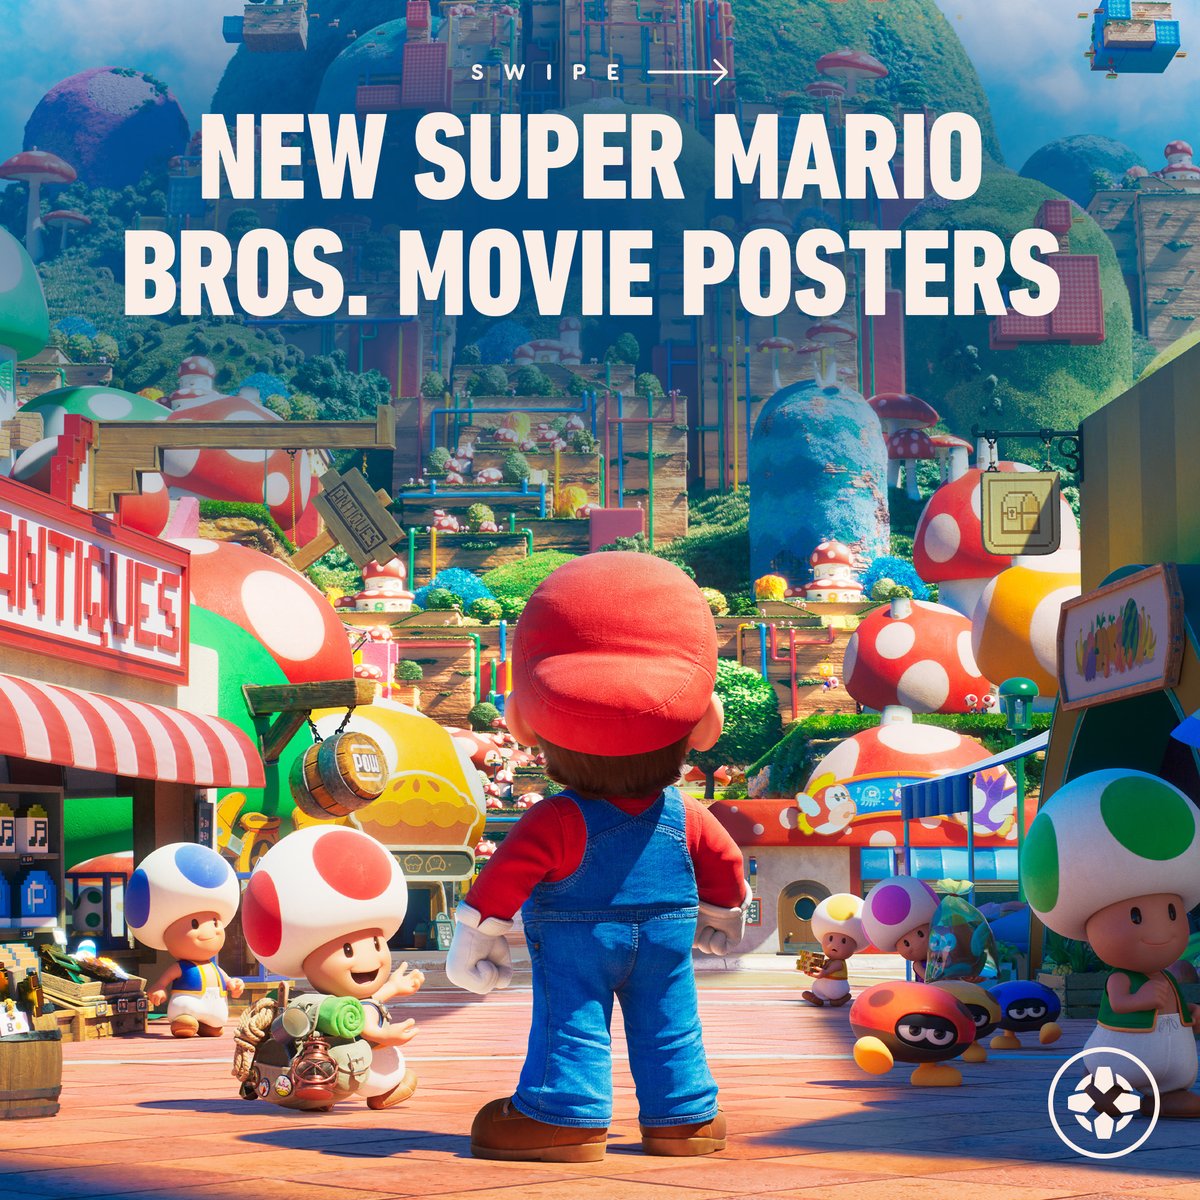 New Super Mario Bros. Movie Toys Are Coming Soon - IGN